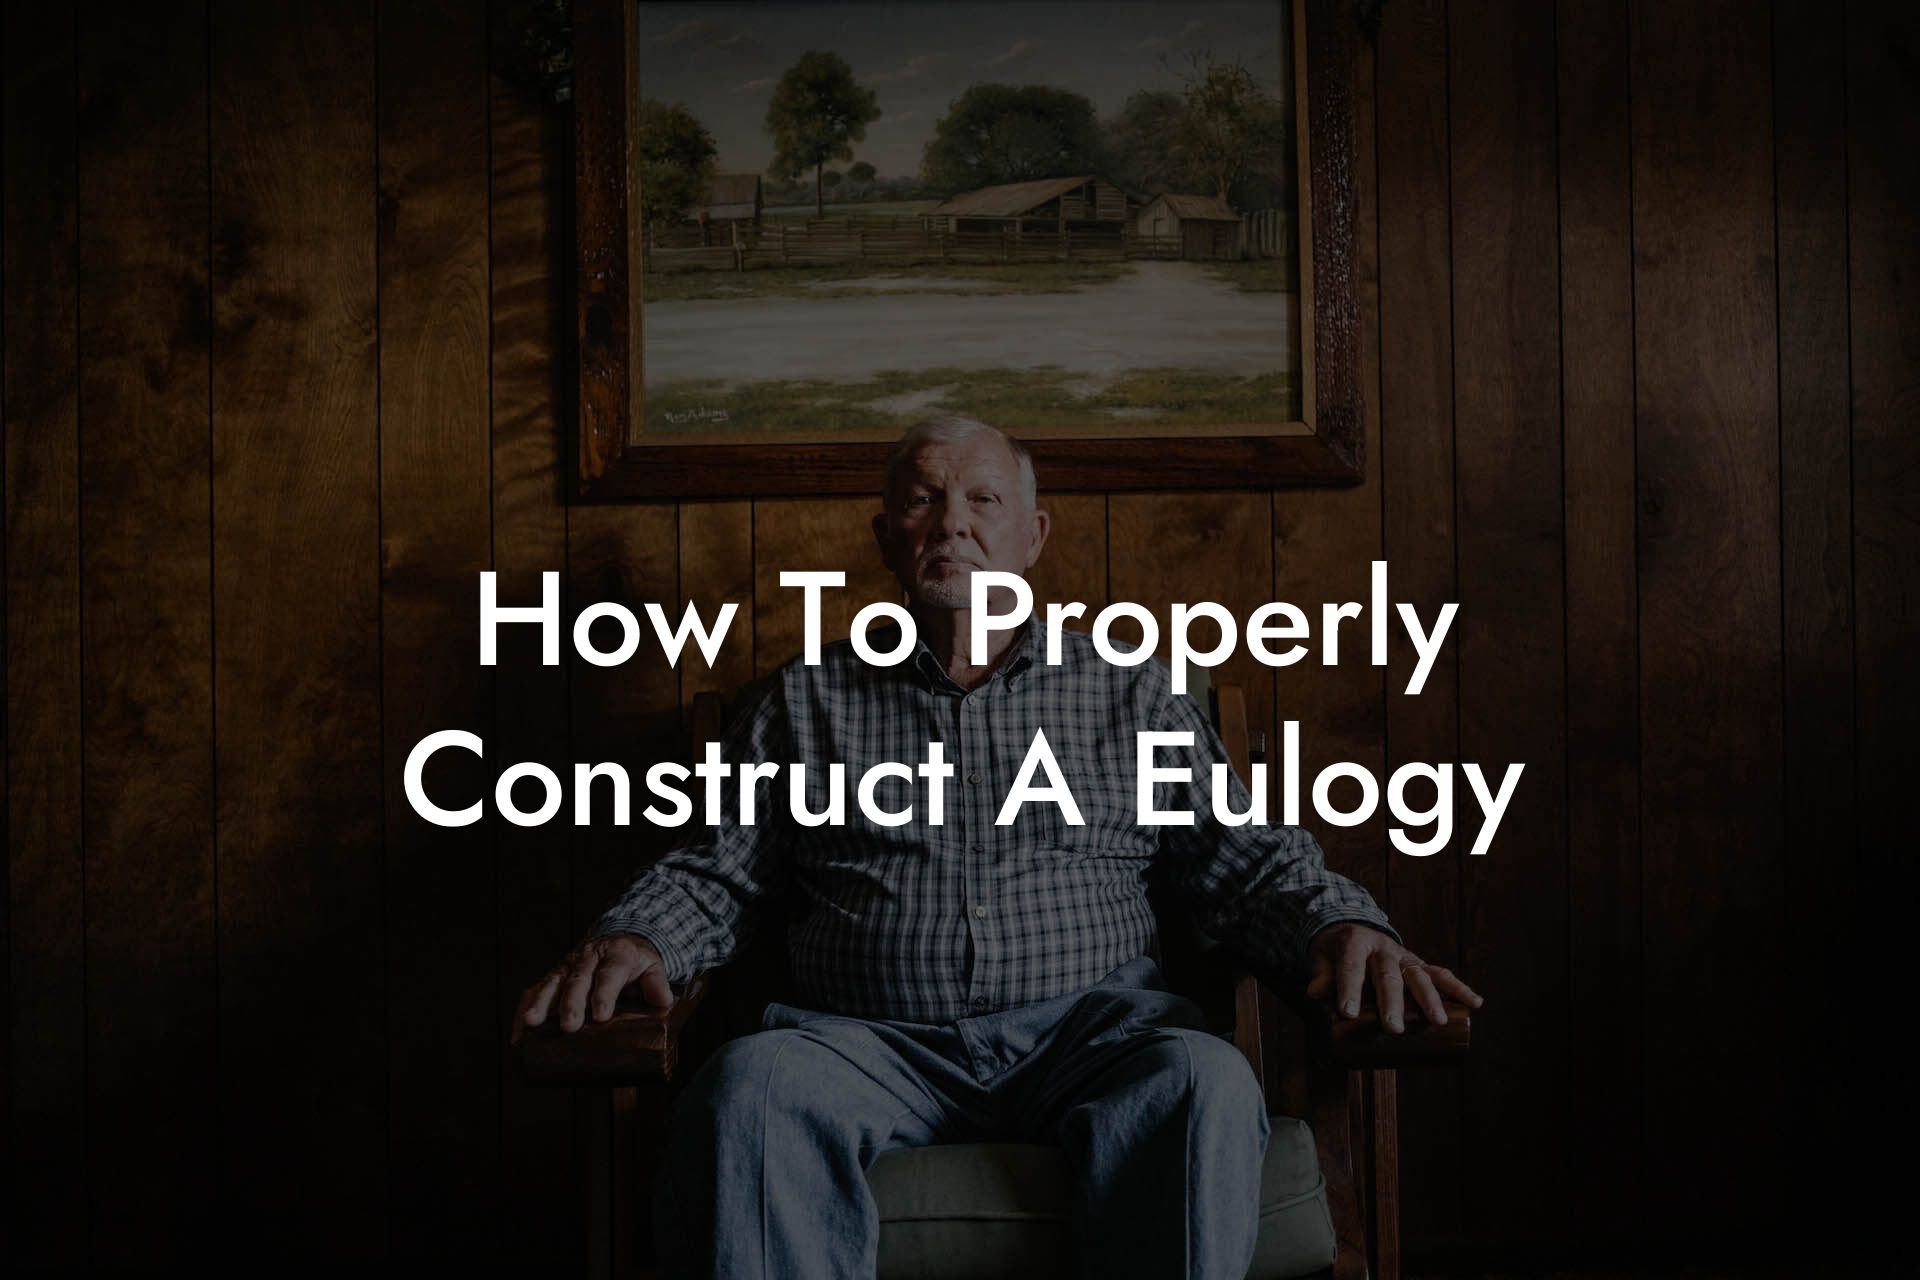 How To Properly Construct A Eulogy